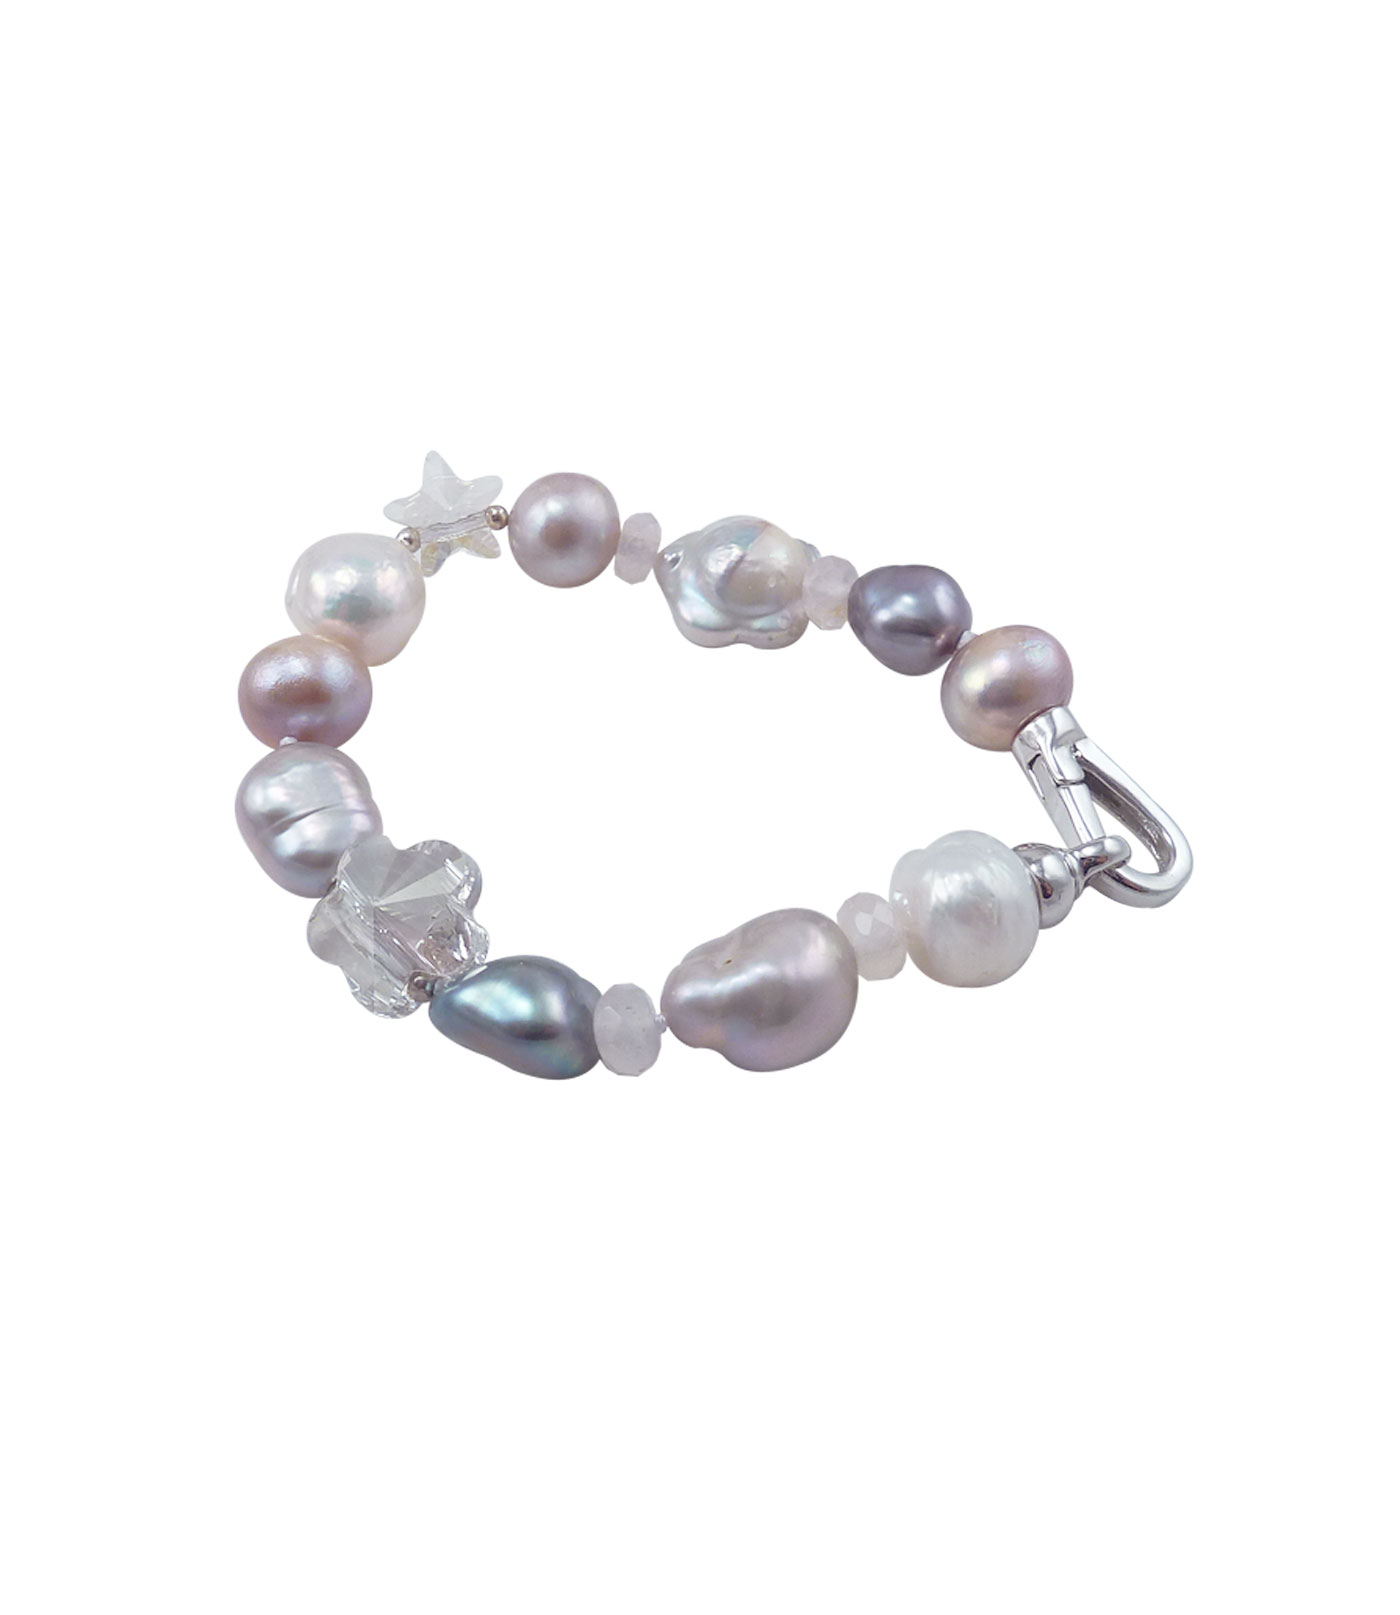 Pearl bracelet grey and white pearls. Modern pearl jewelry